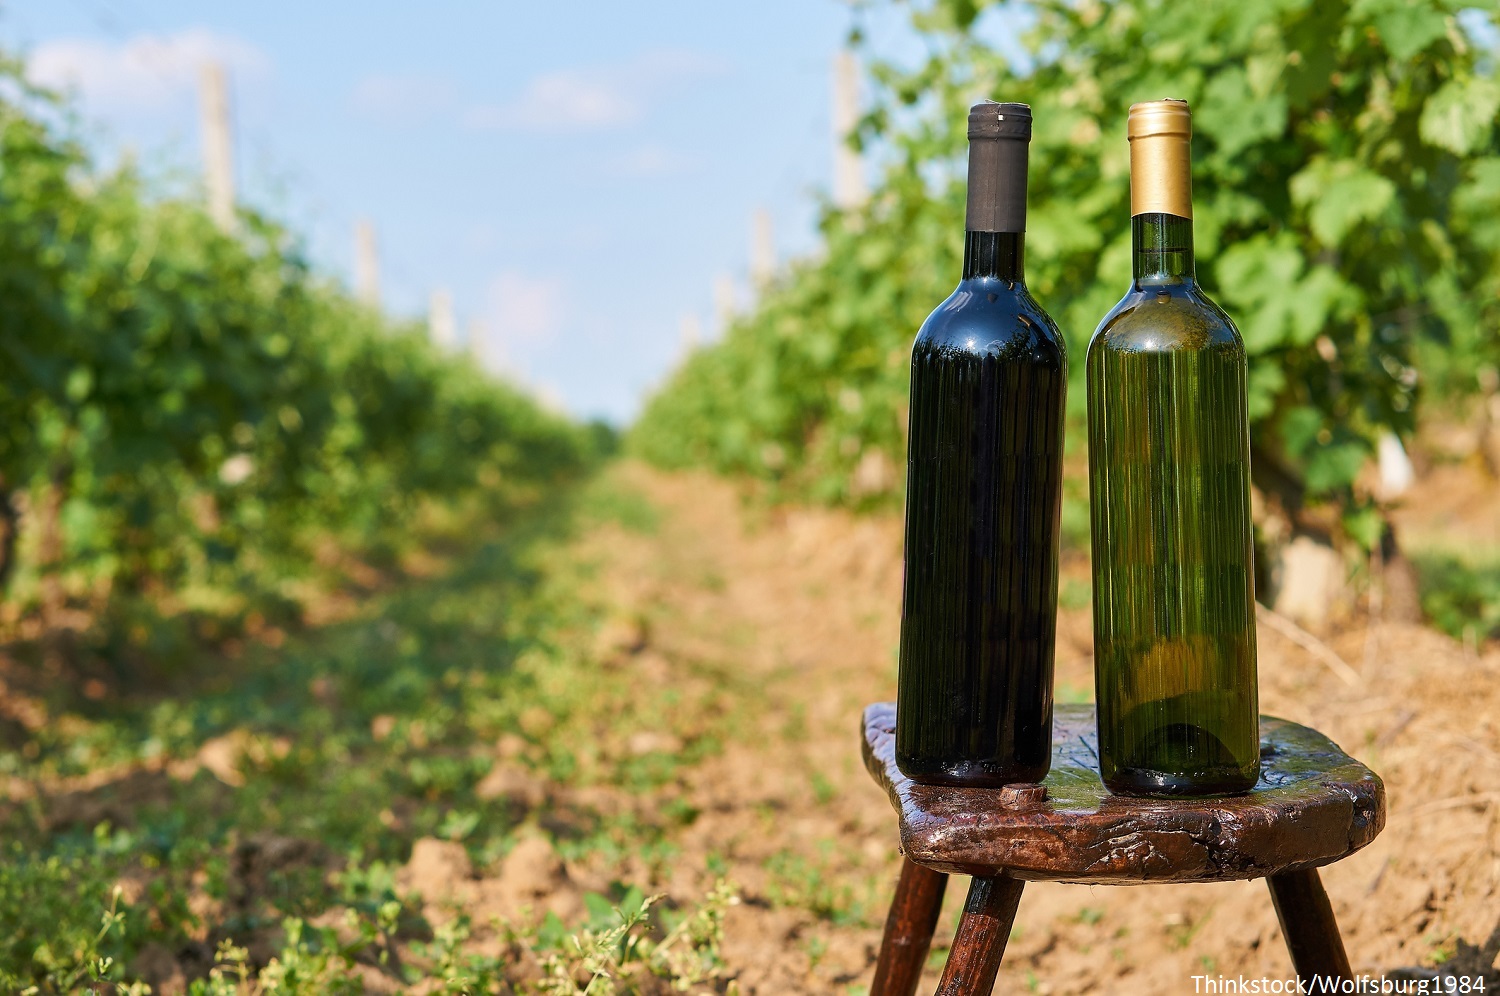 The Top 3 Poconos Wineries You Need to Visit